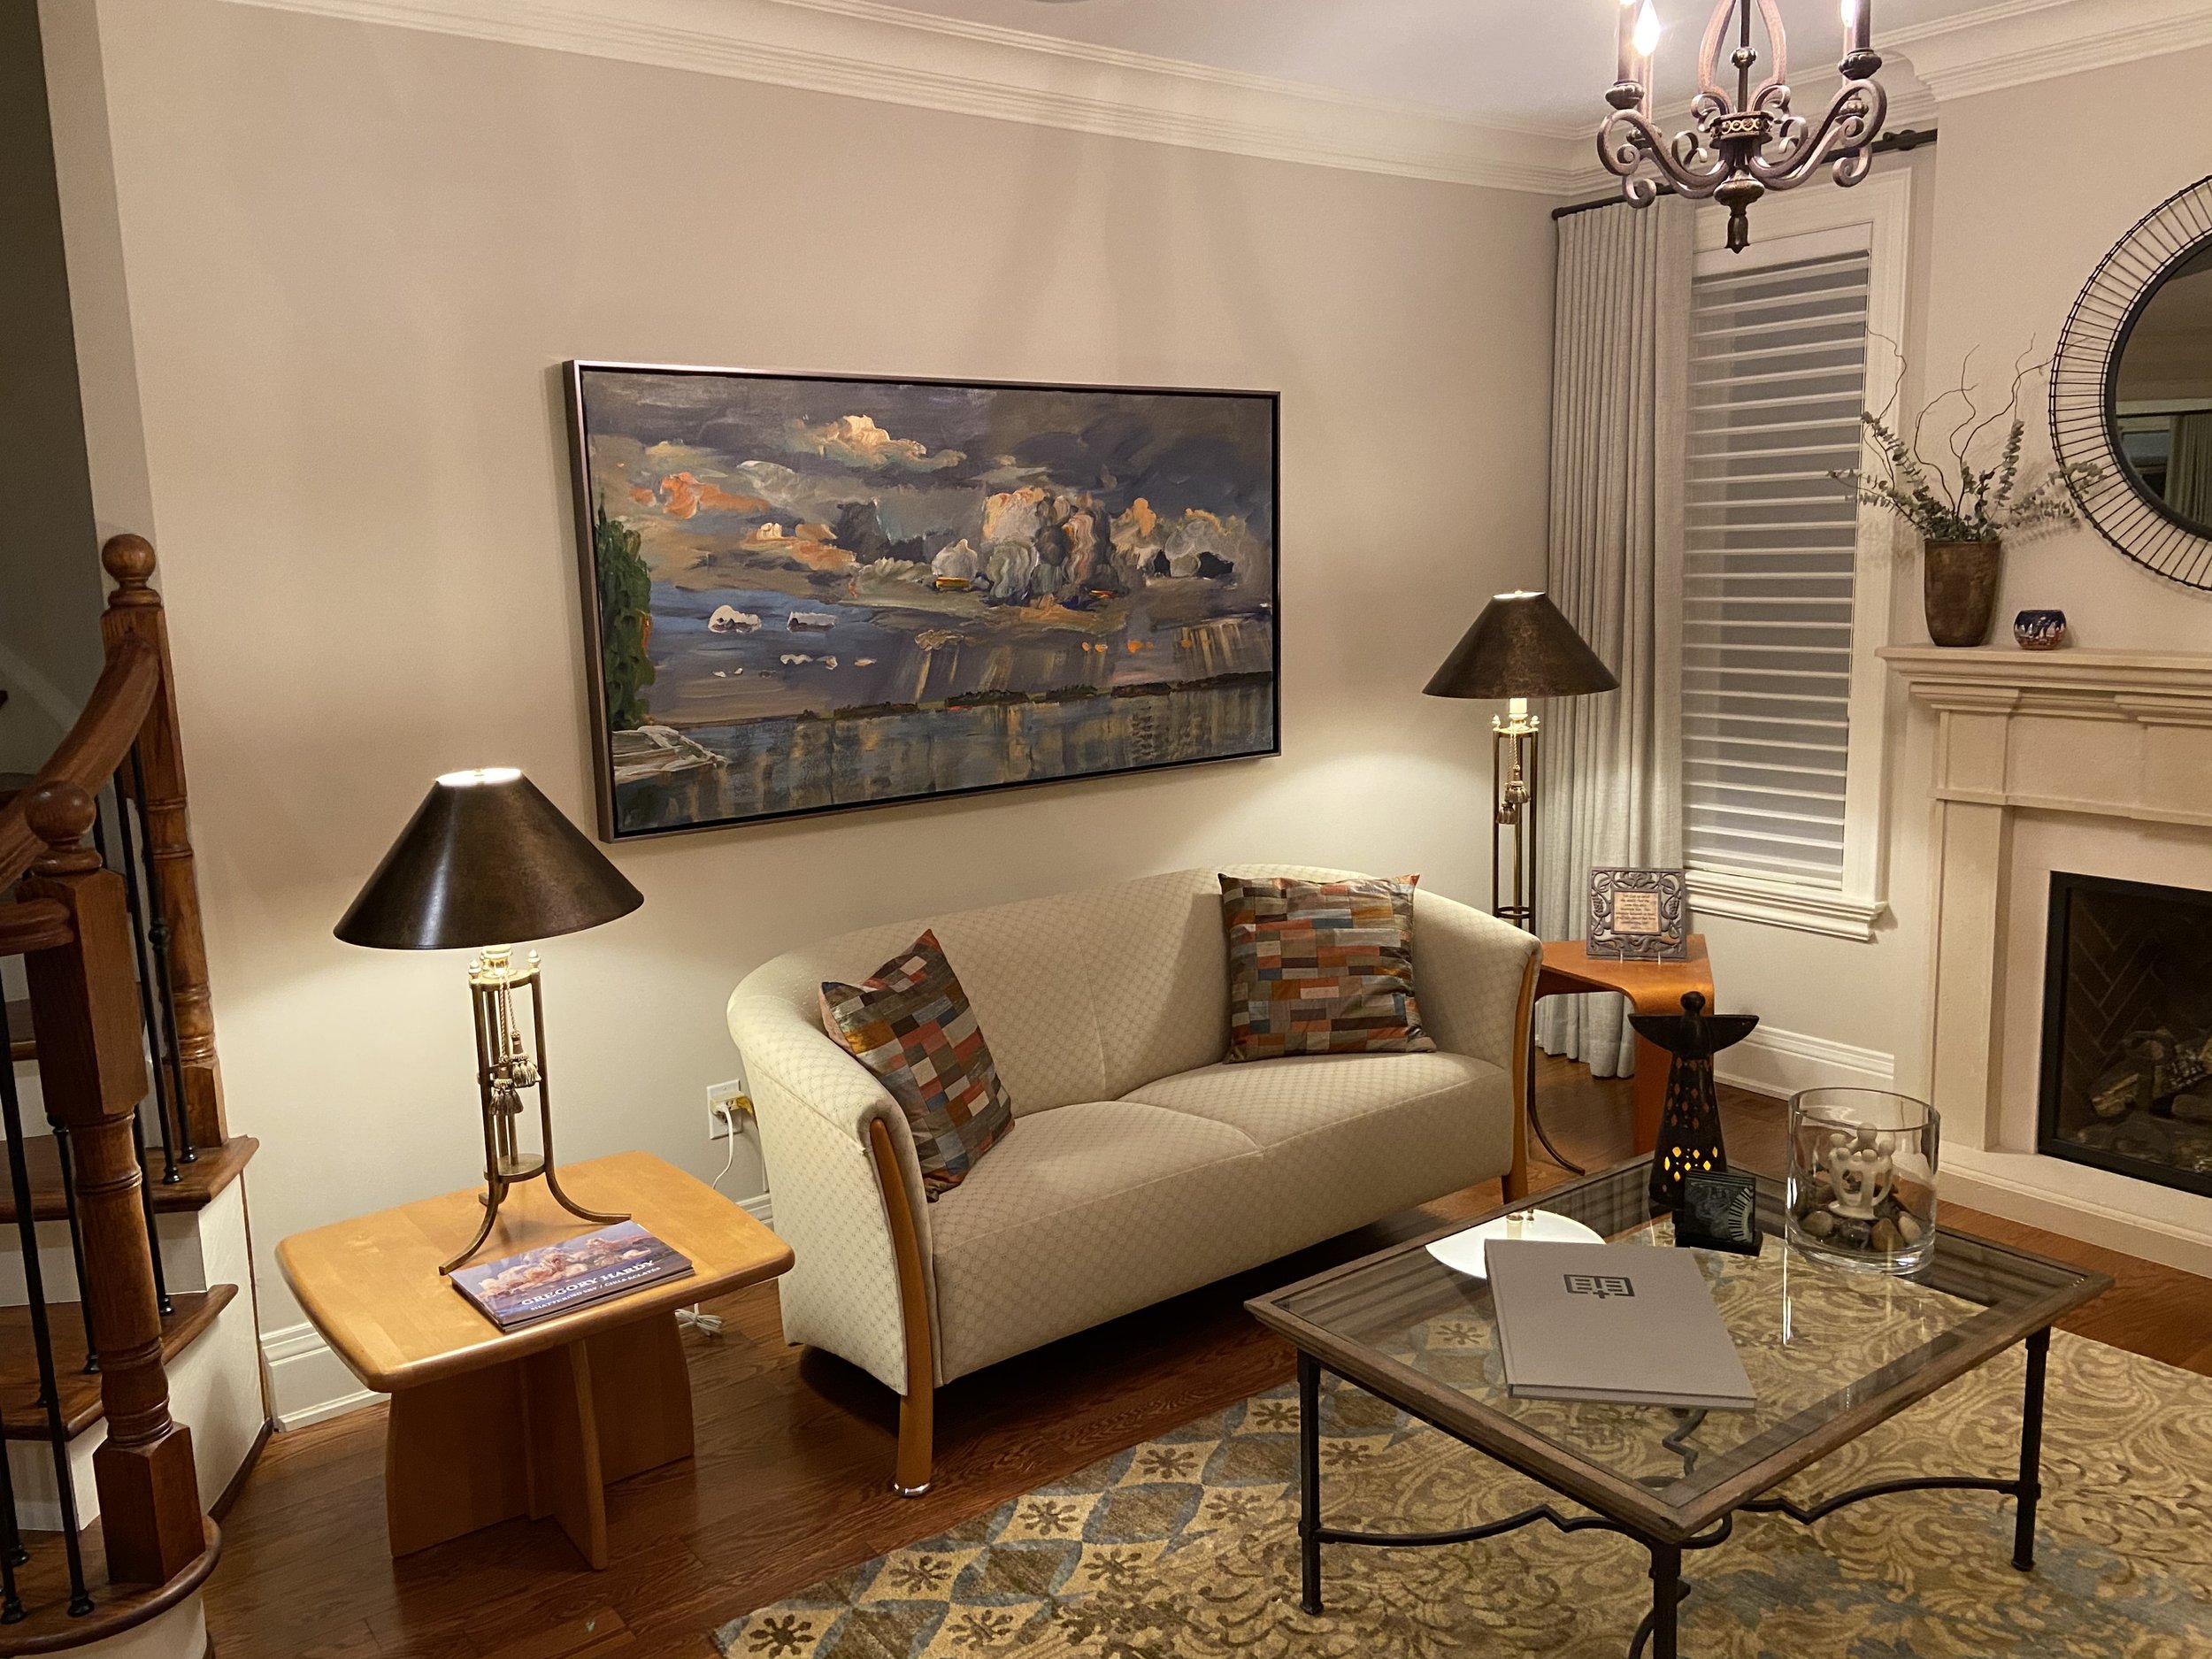 This beautiful Hardy painting "Shimmer on the Lake" looks gorgeous in this Oakville home